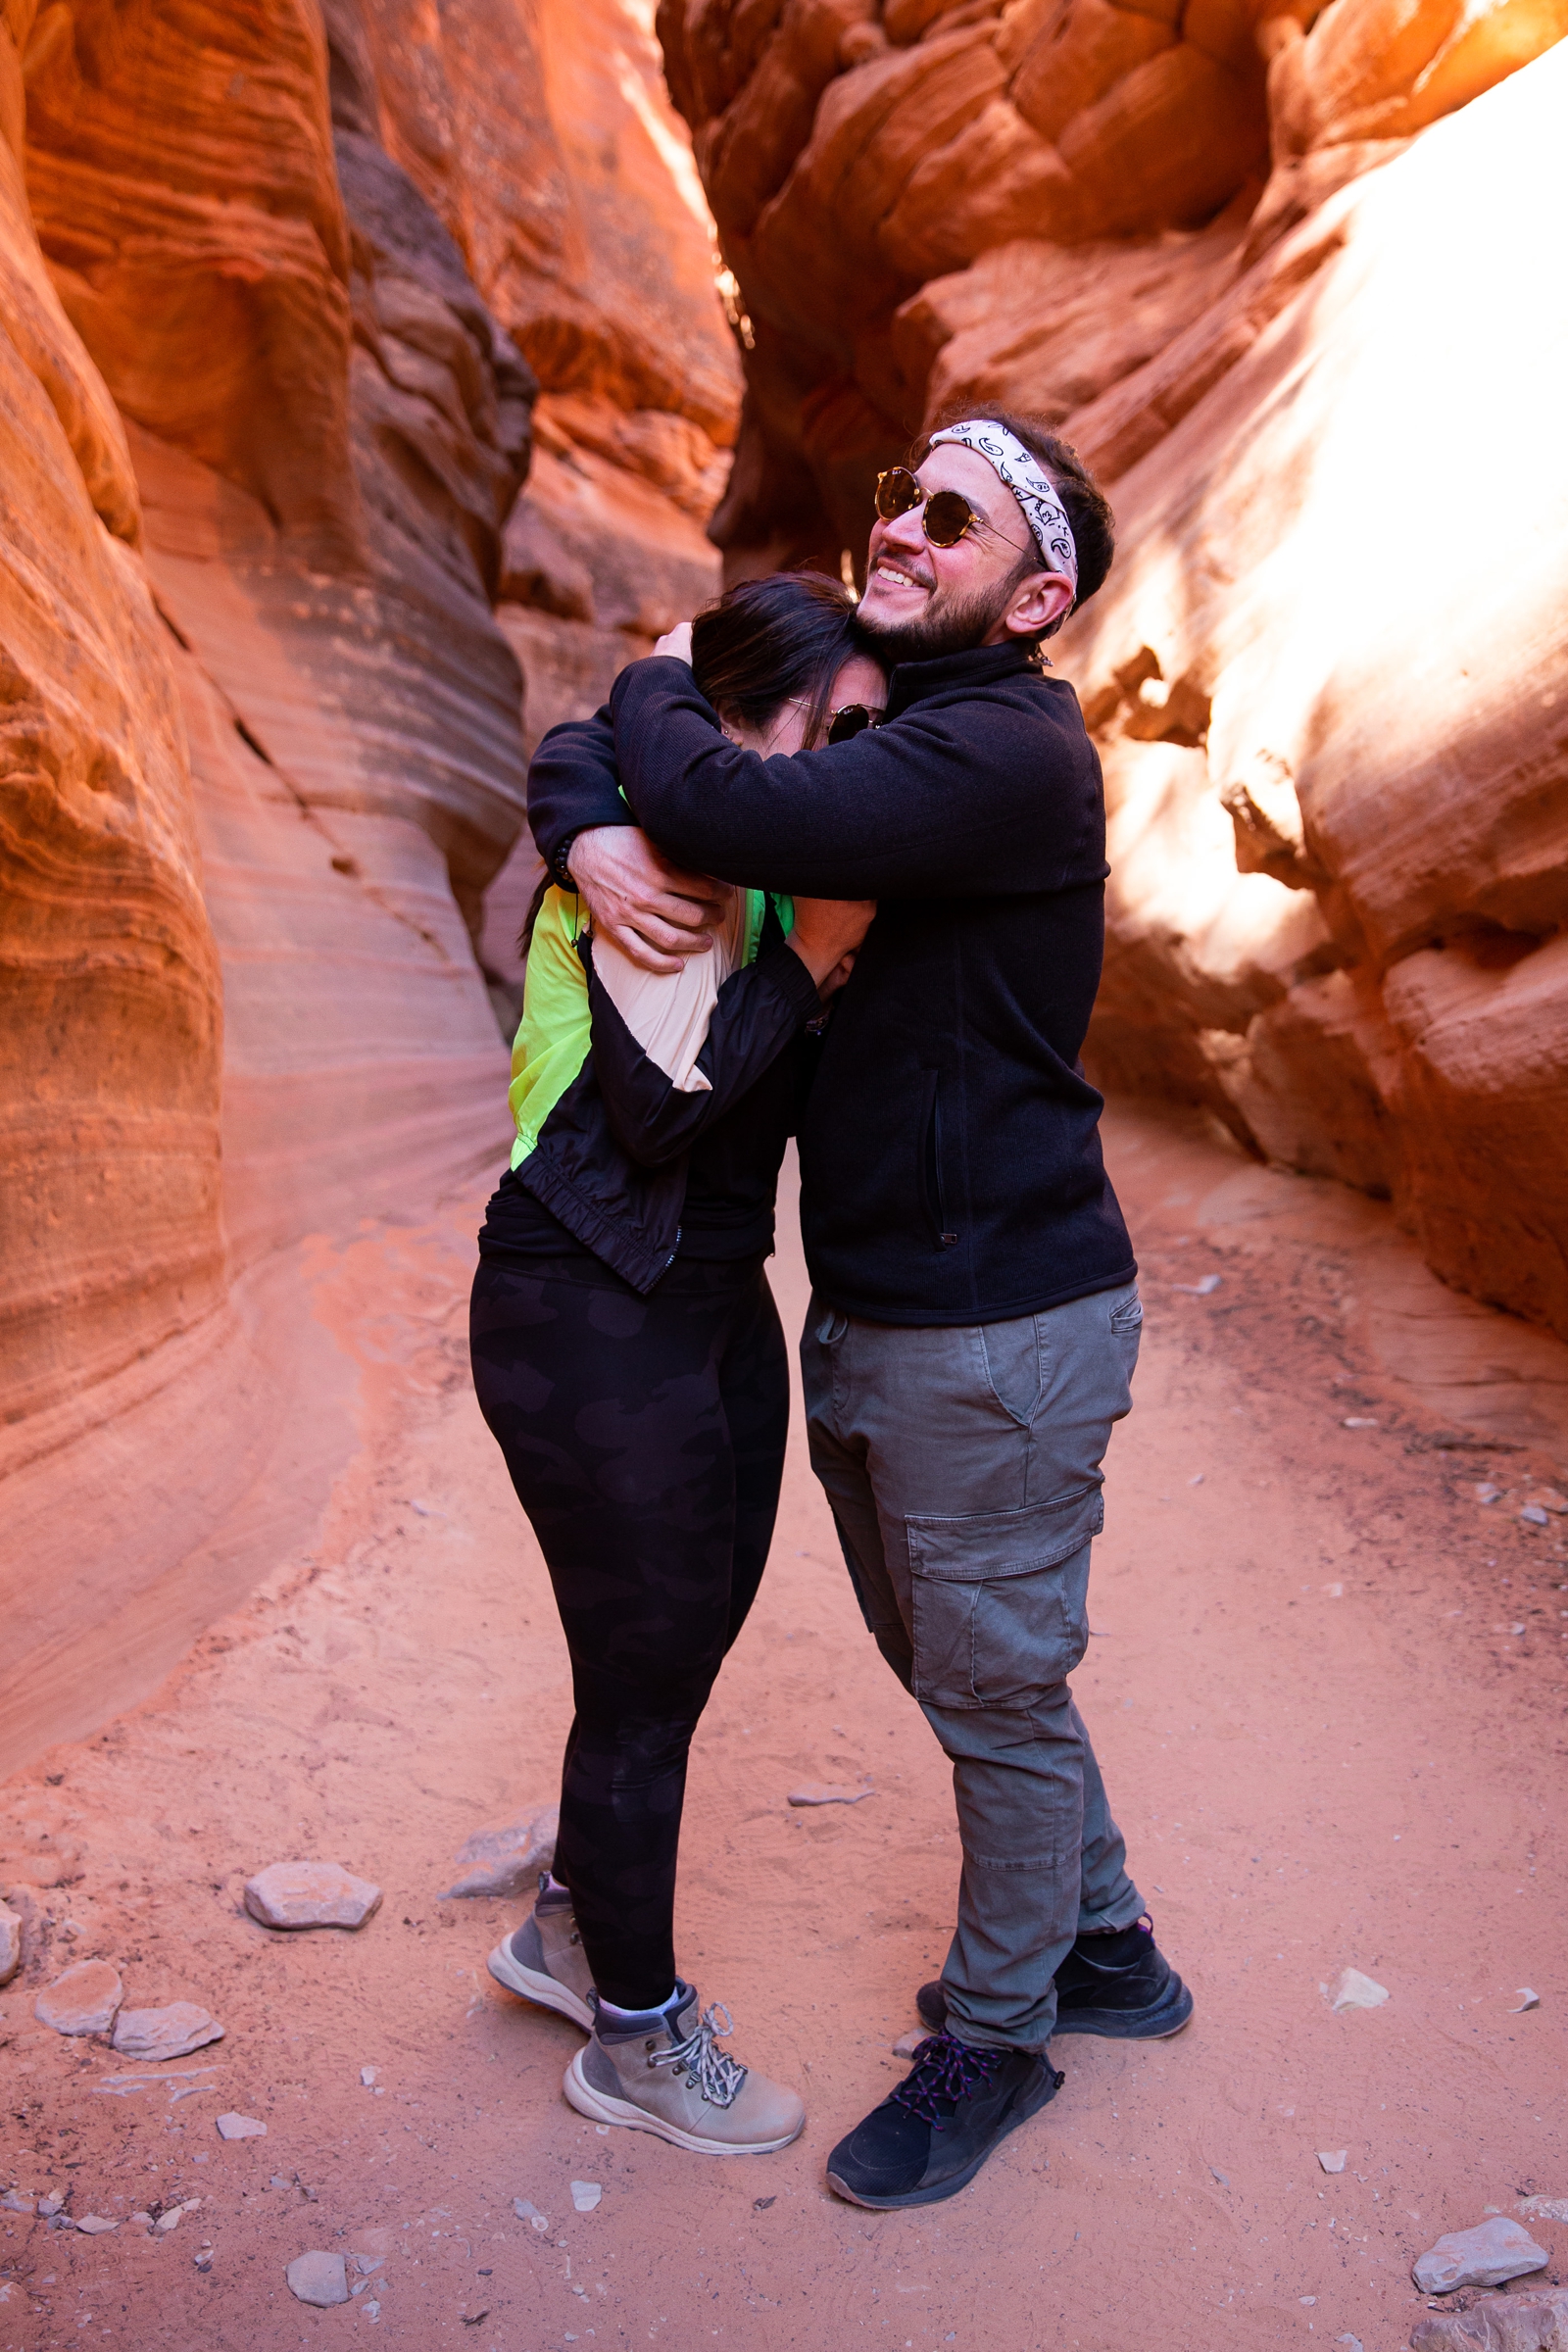 a newly engaged couple embracing after their surprise proposal in the Utah slot canyon during the adventurous hike